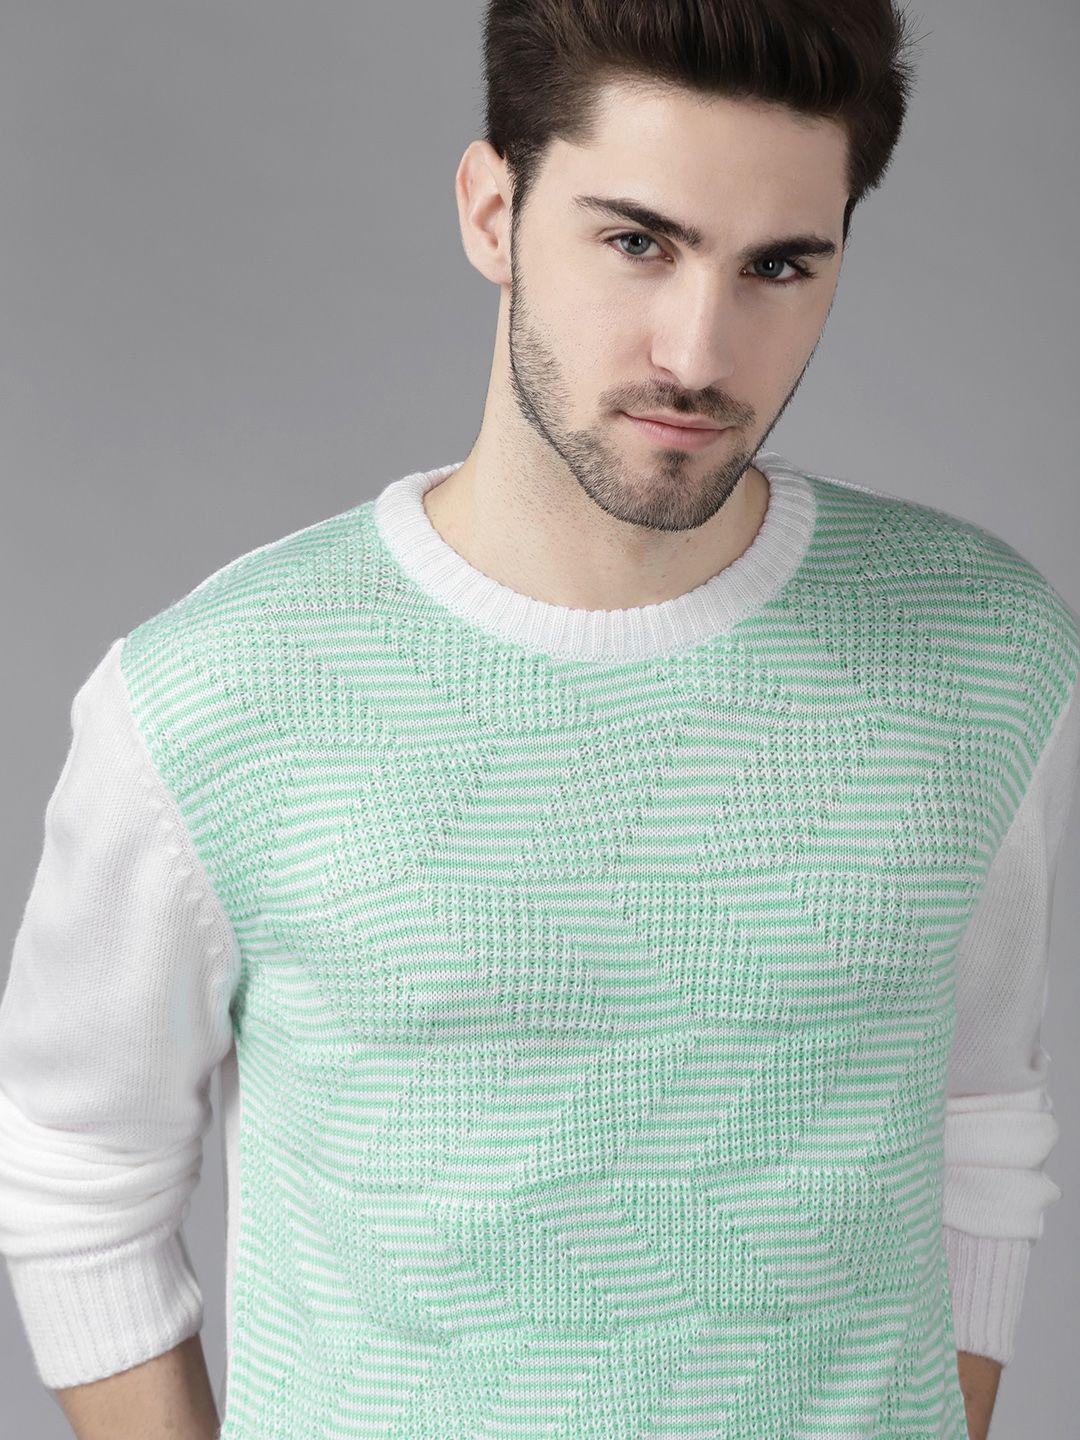 the-roadster-lifestyle-co-men-green-&-white-acrylic-cardigan